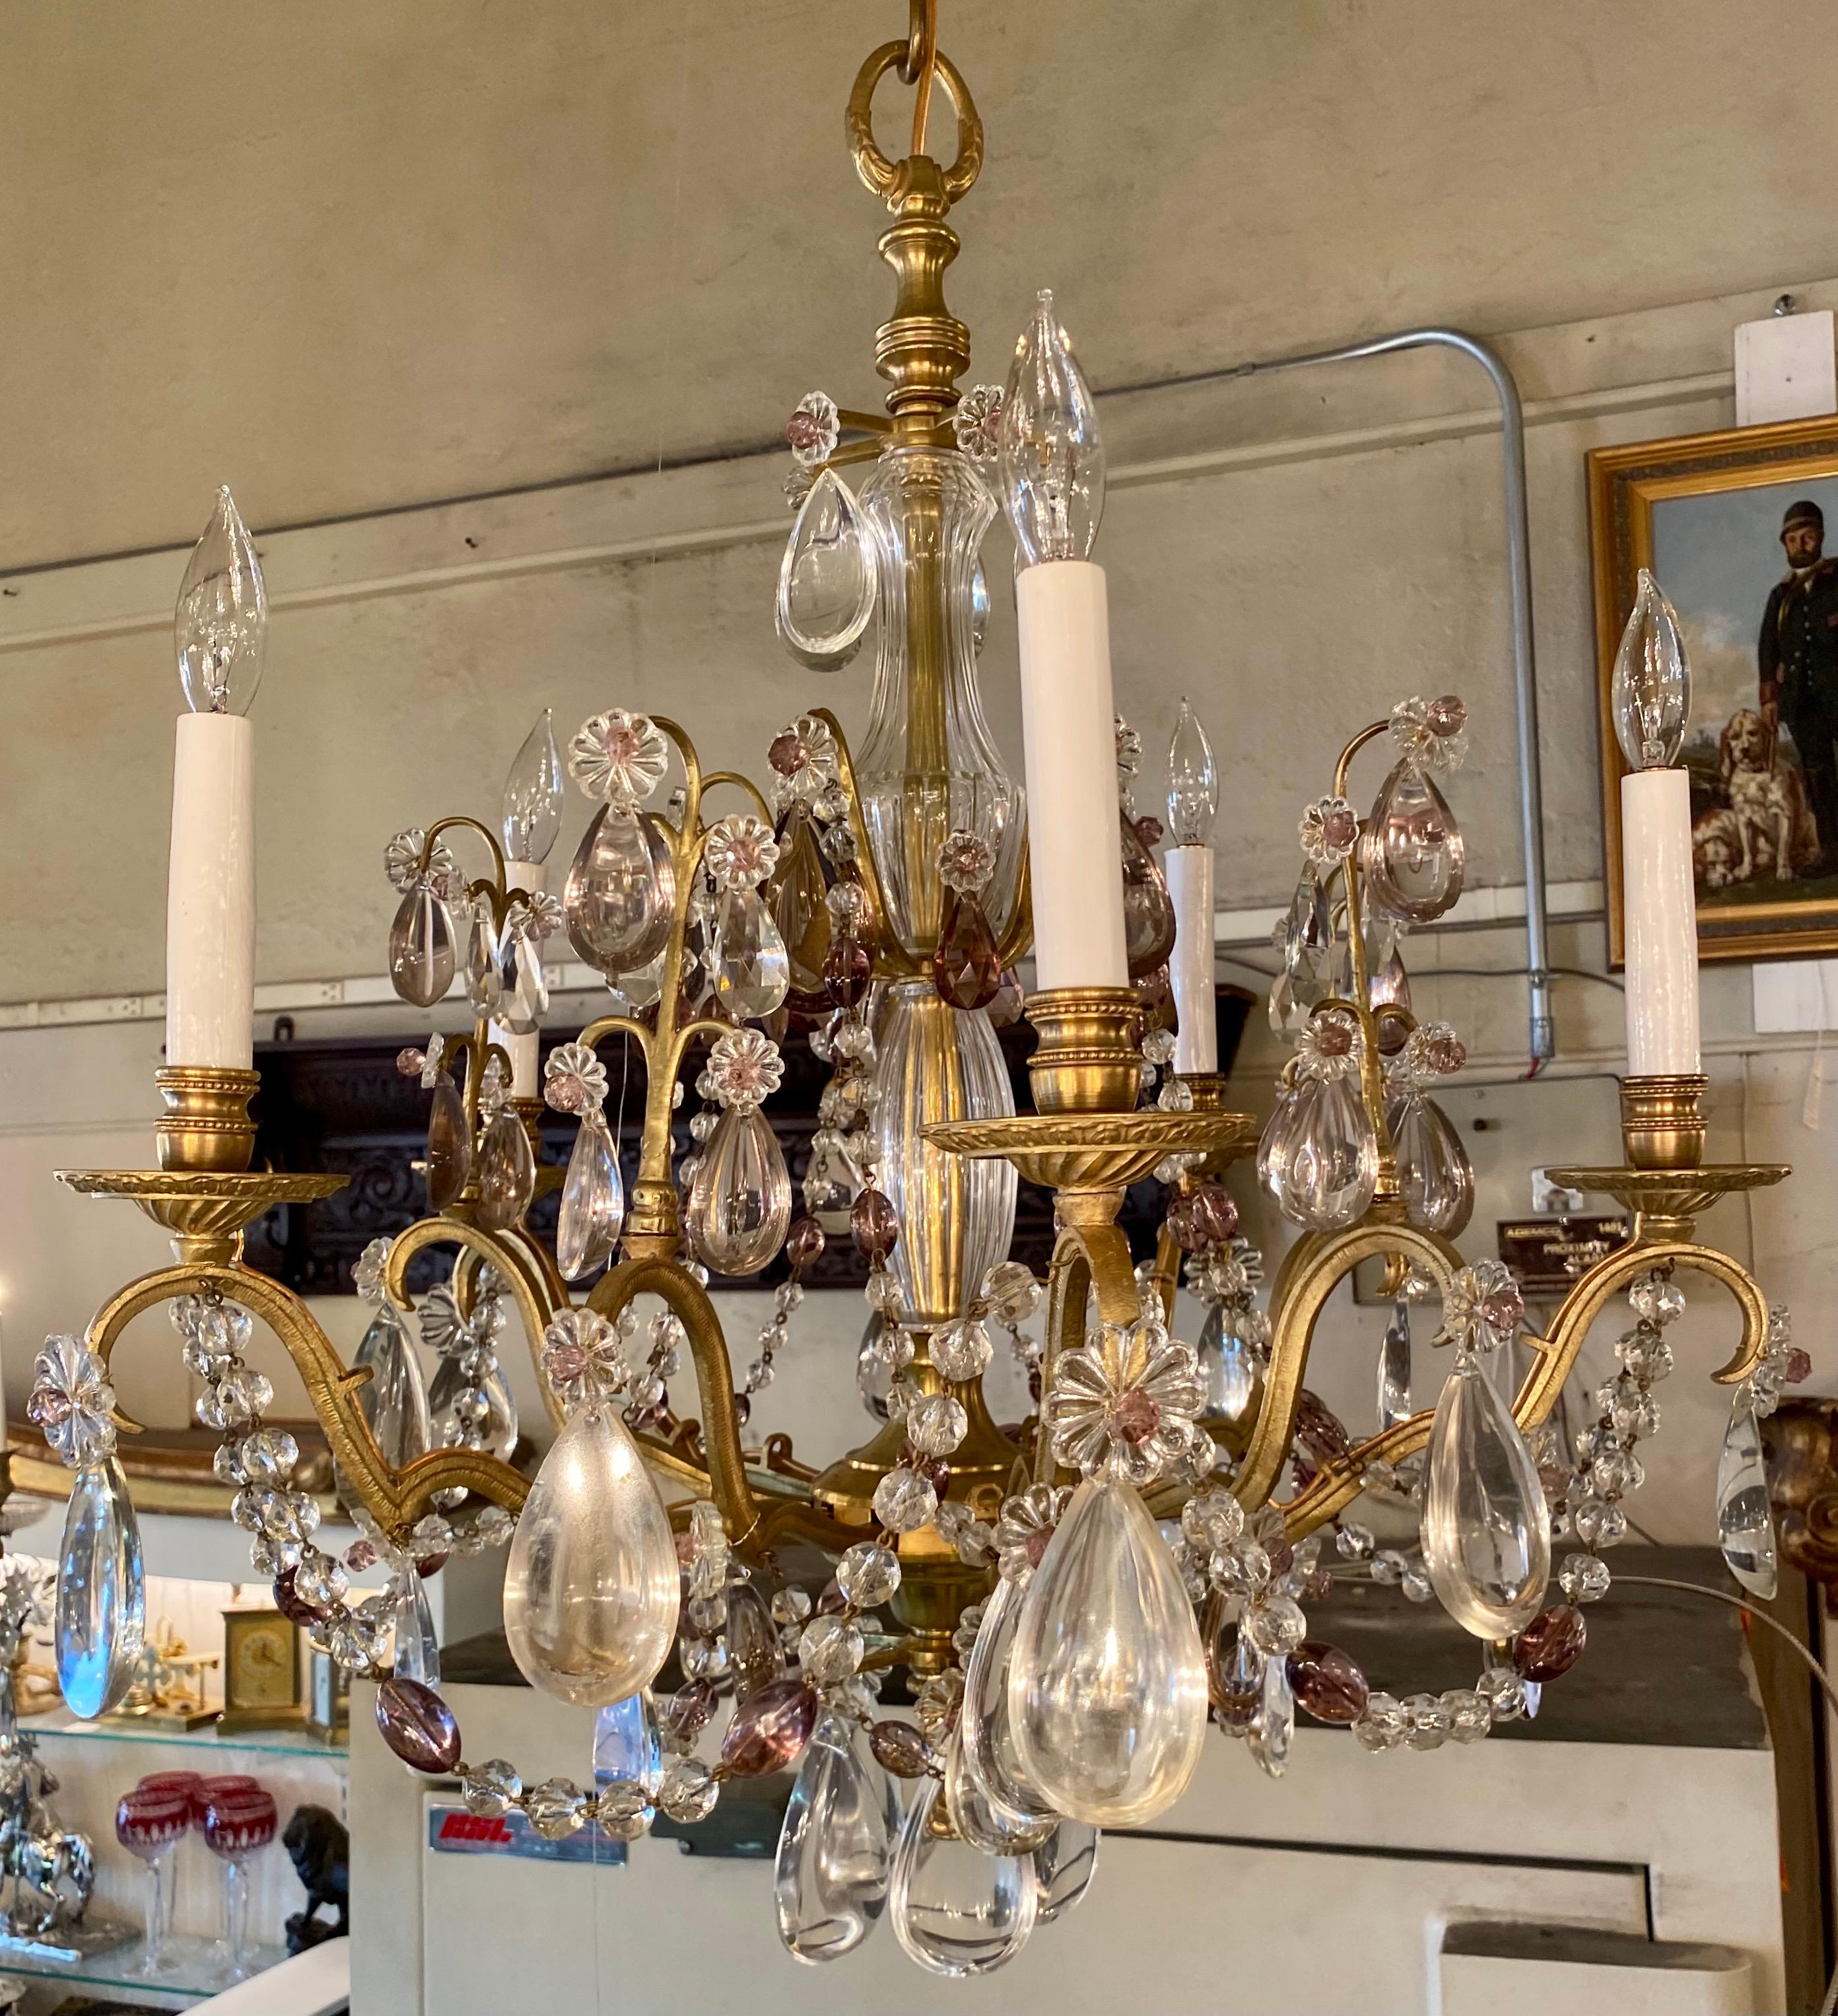 Antique French gold bronze & clear and amethyst baccarat crystal chandelier, Circa 1890.
This is a nice shape chandelier for lower ceilings and small spaces.